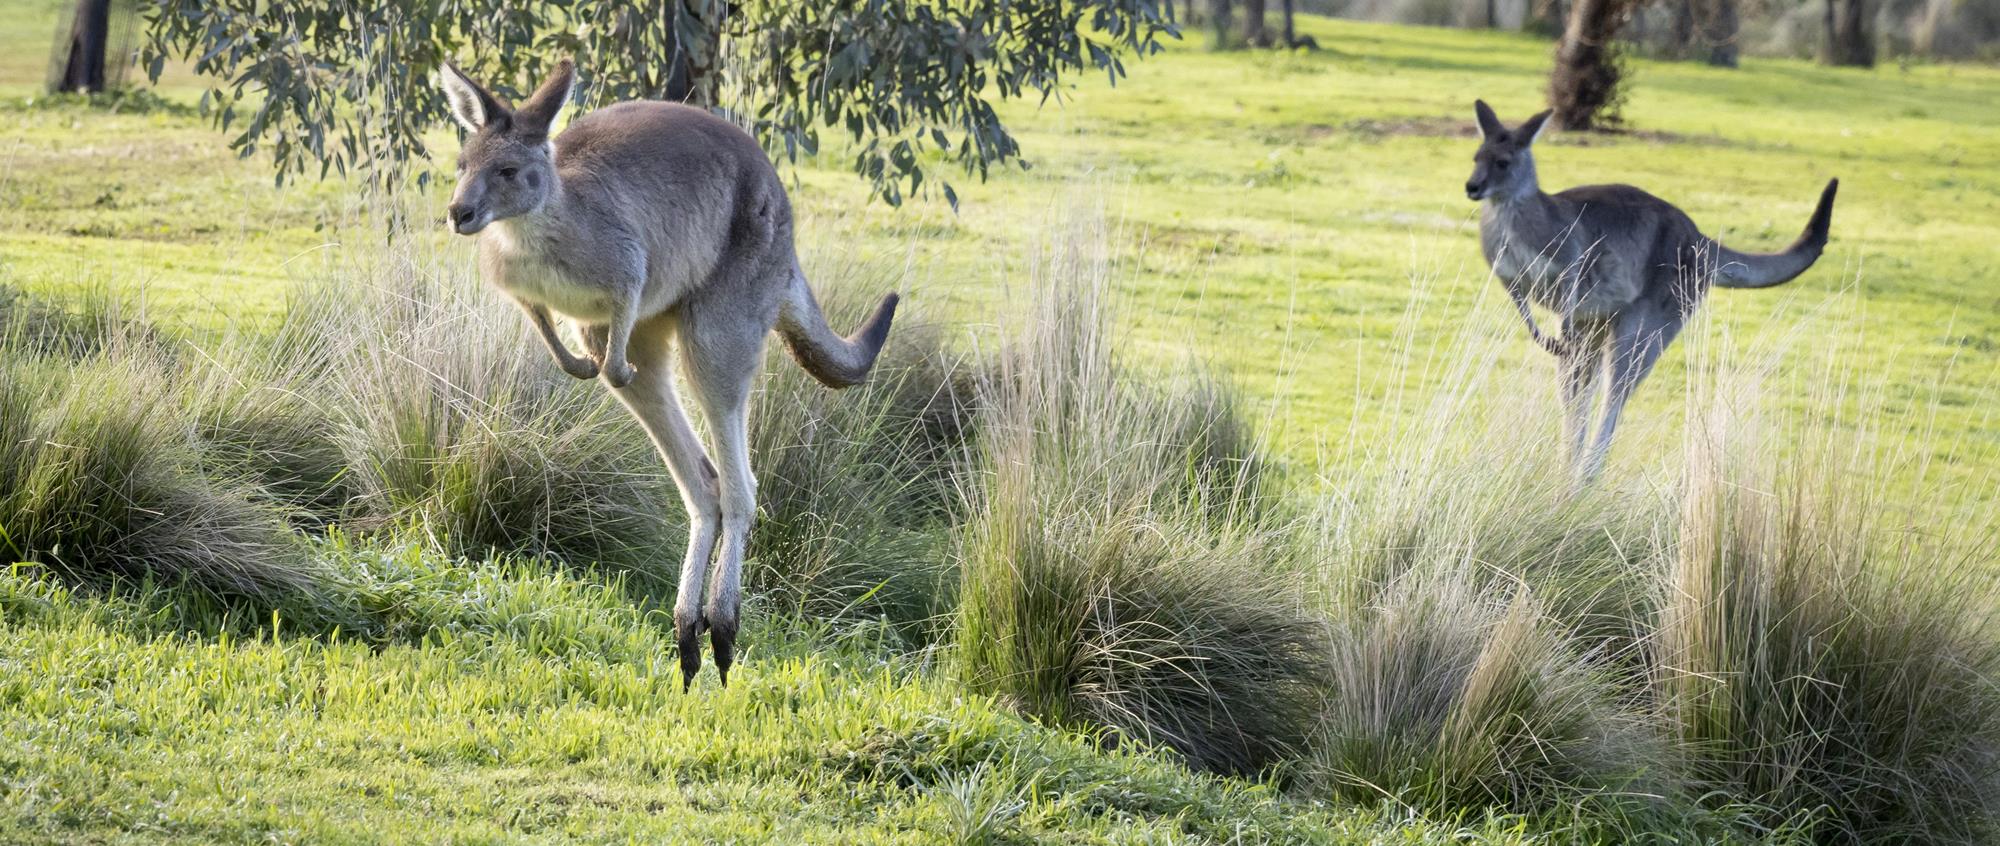 Two Eastern Grey Kangaroos hopping through grassland, forward to left, with one following the other behind tall grass.